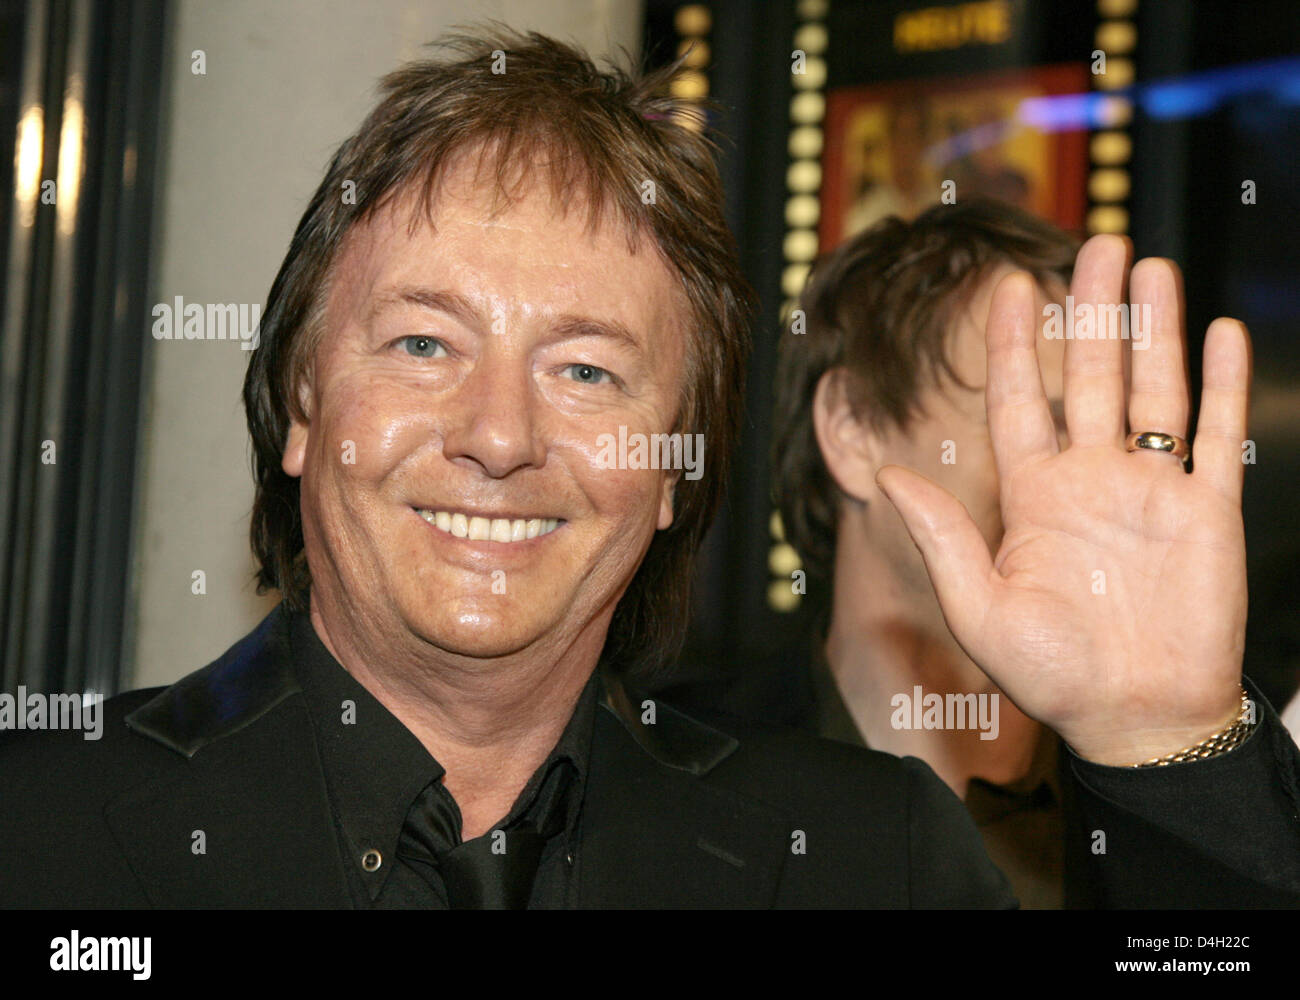 British singer Chris Norman, former singer of the band 'Smokie', greets  guests at the premiere of the motion picture 'Selbstgespraeche ('Come in  and Burn Out') at 'Kulturbrauerei' cinema in Berlin, Germany, 31